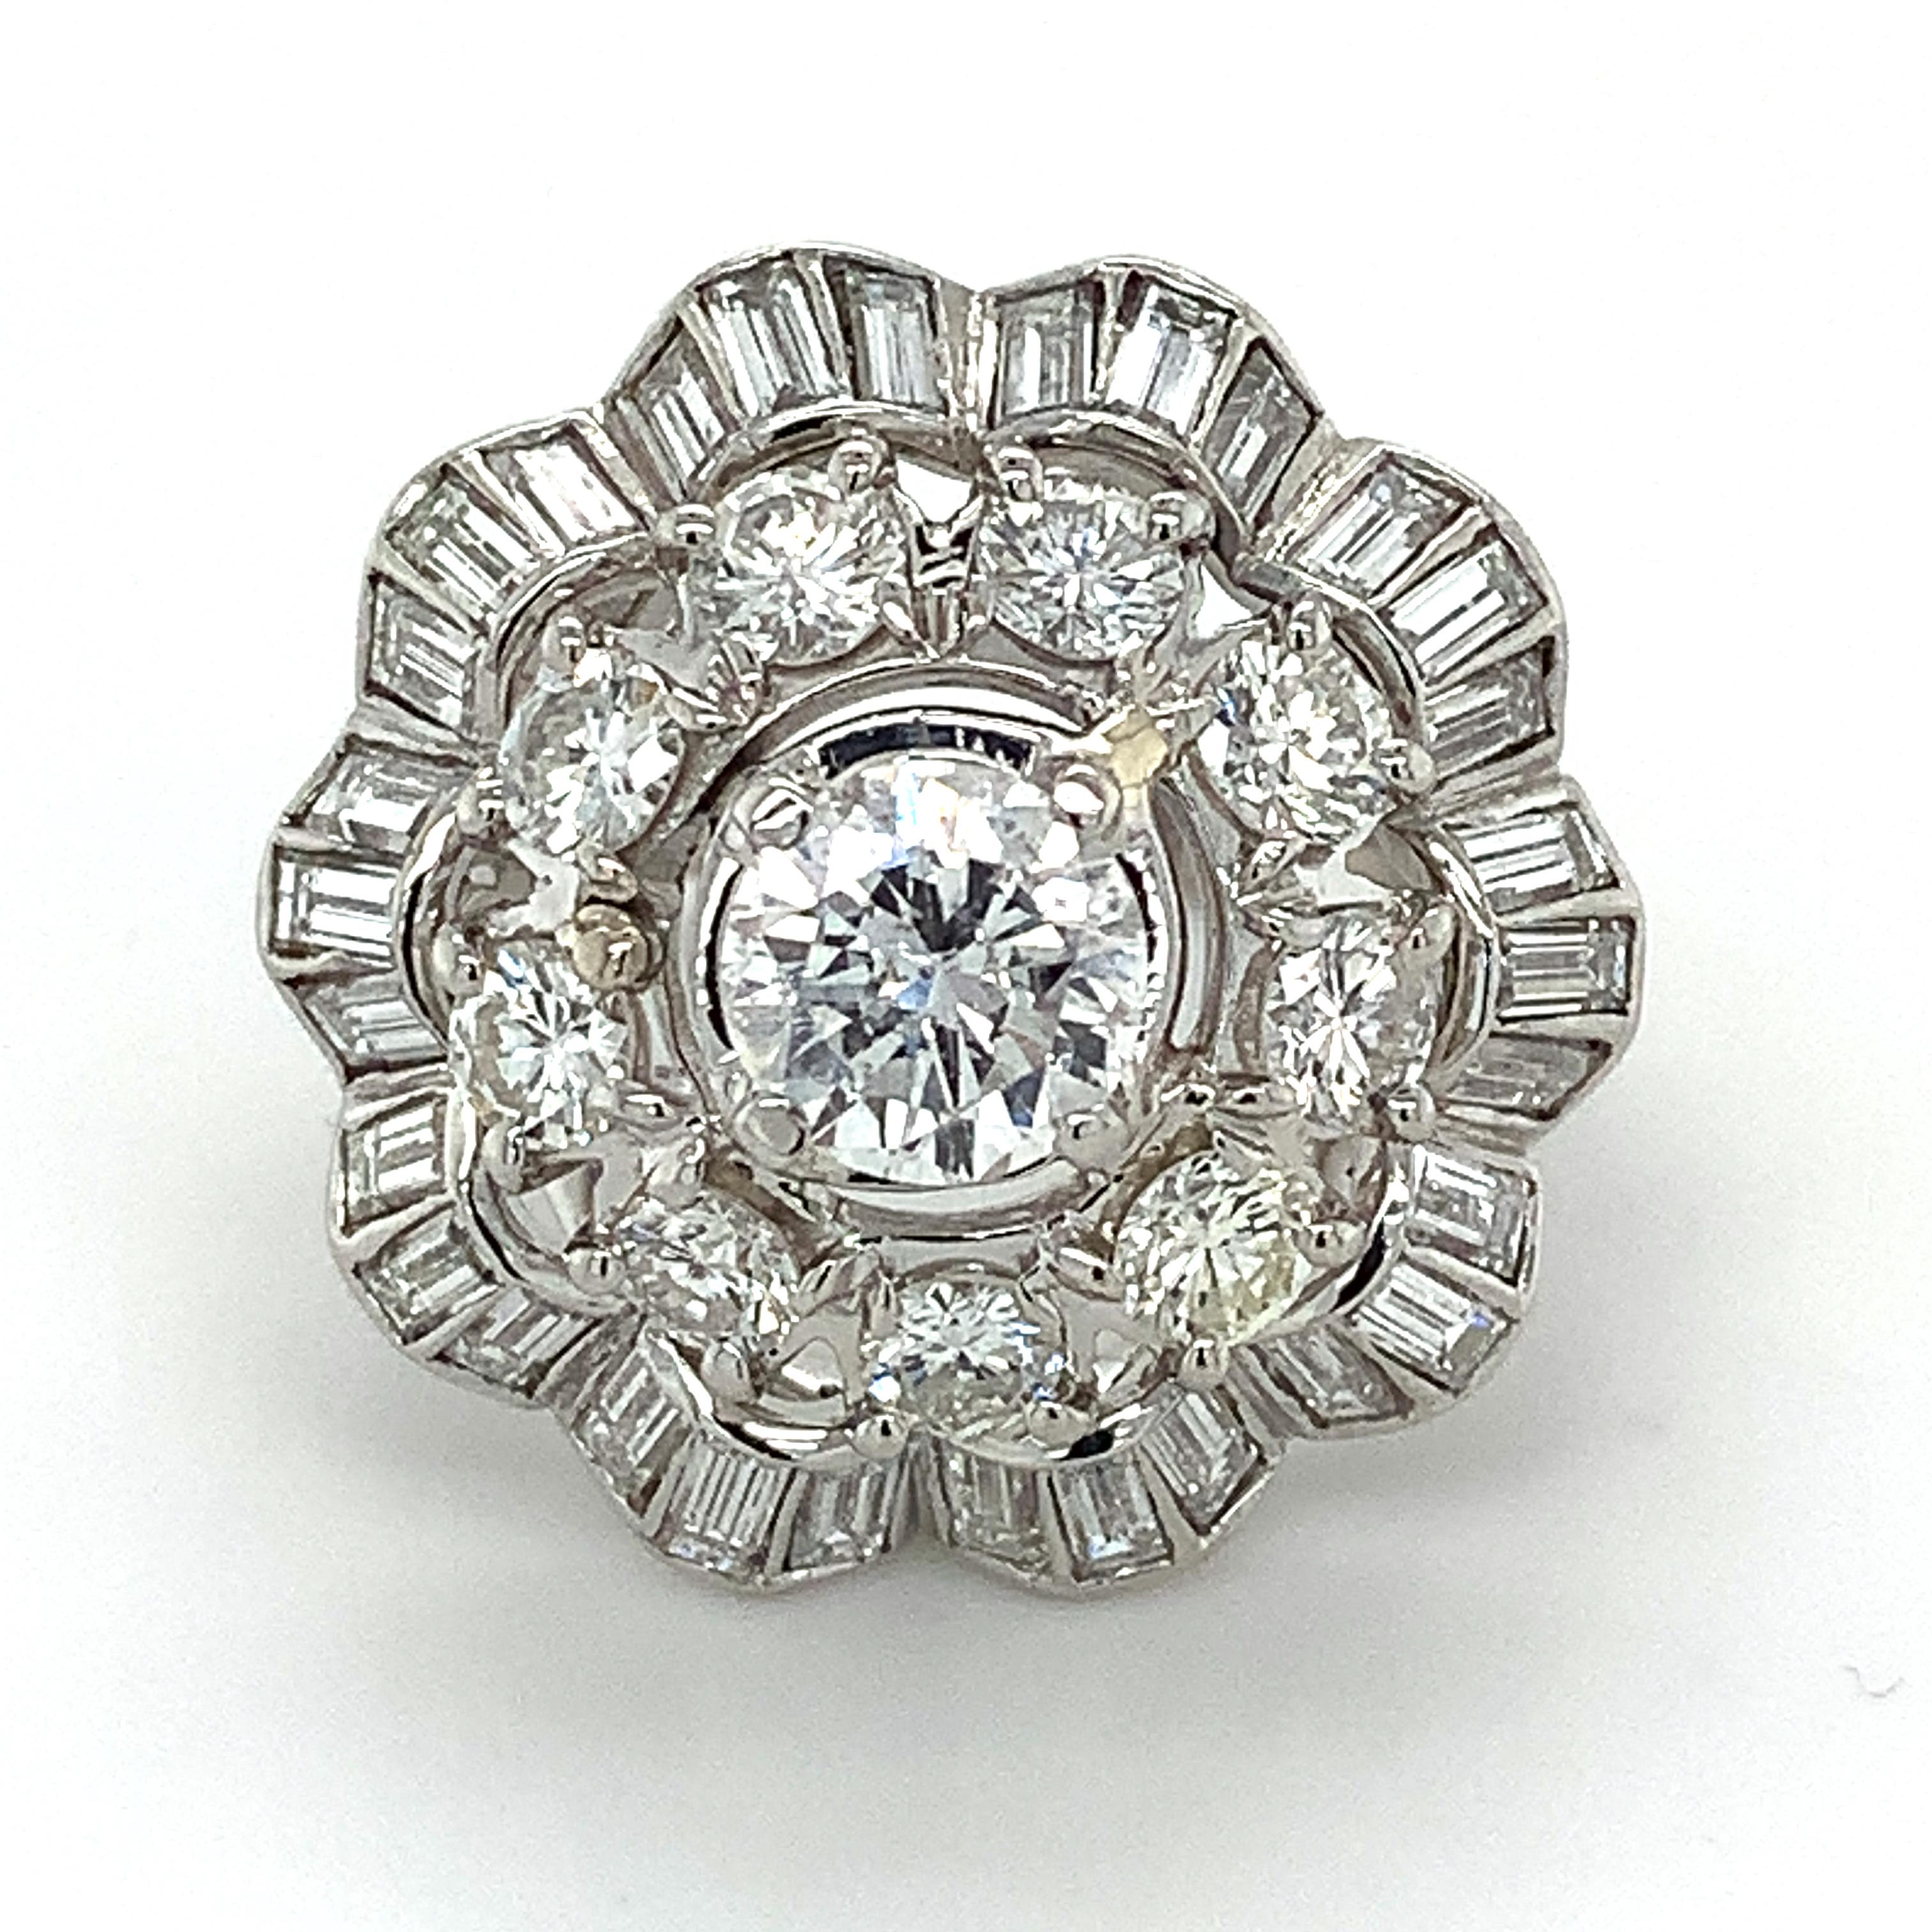 10% Iridium 90% Platinum White Round & Baguette Diamonds Ring
10.9 Grams
Ring Size 5.25
1 Round Diamond Center 0.85 Carat Center 
Color: G-H Clarity: I1
Baguette And Round Diamonds 
2.5  Carats Total Weight
Clarity: Vs1-Si Color: G-I
This is a